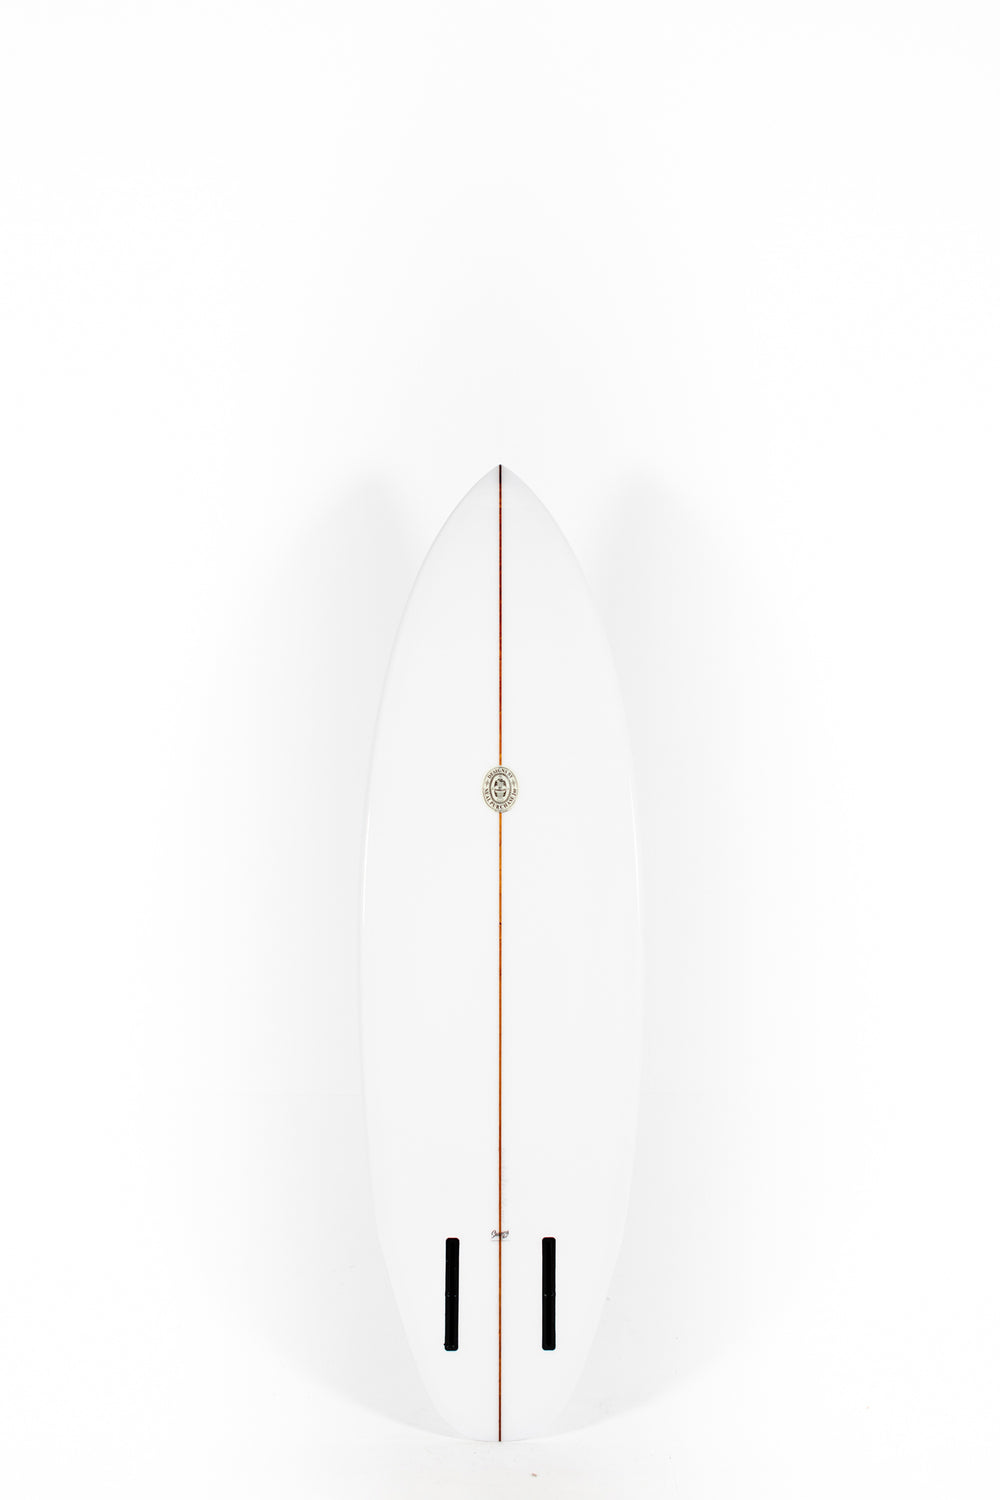 Neal Purchase Jnr Surfboards - DUO STAGE 2 - 6'2